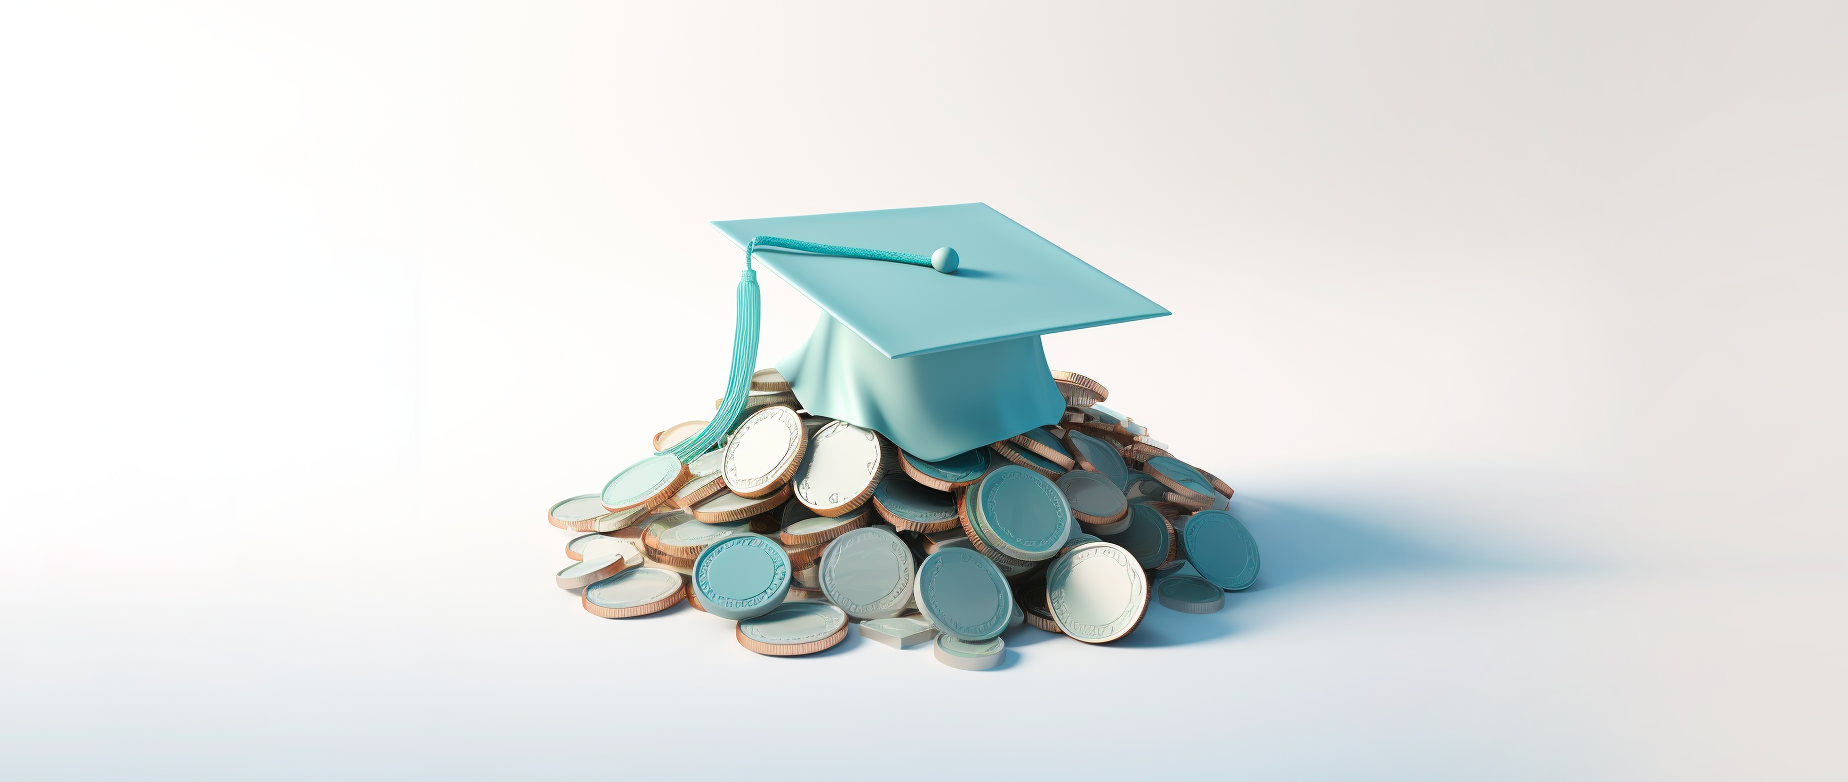 A light blue graduation cap on a stack of silver coins.